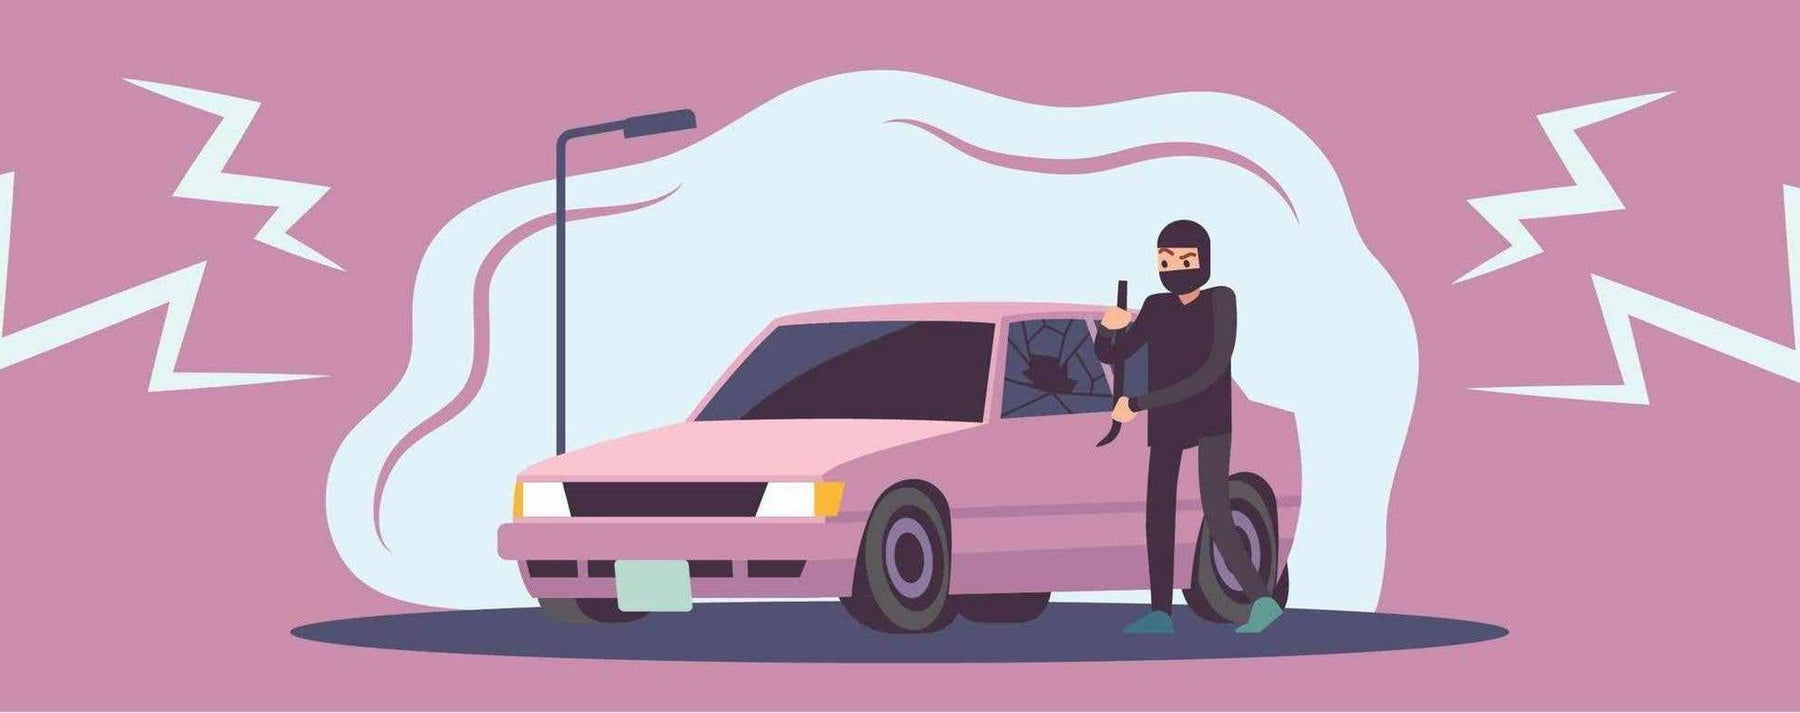 Protect Your Ride: The Rise of Vehicle Theft Across North America - - BlackboxMyCar Canada